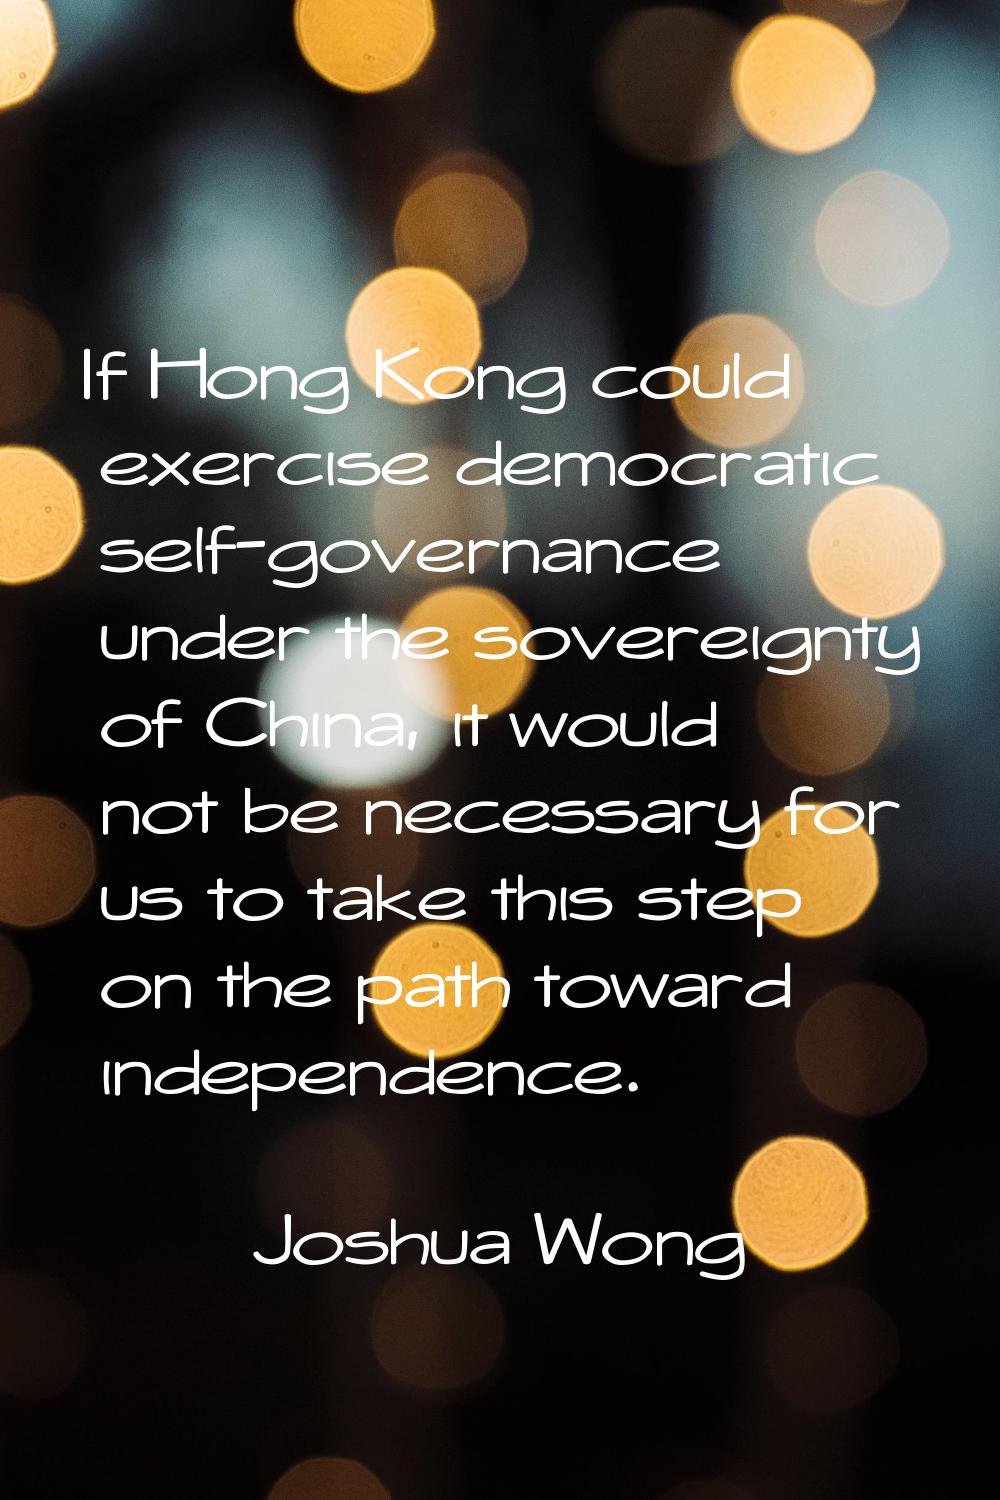 If Hong Kong could exercise democratic self-governance under the sovereignty of China, it would not